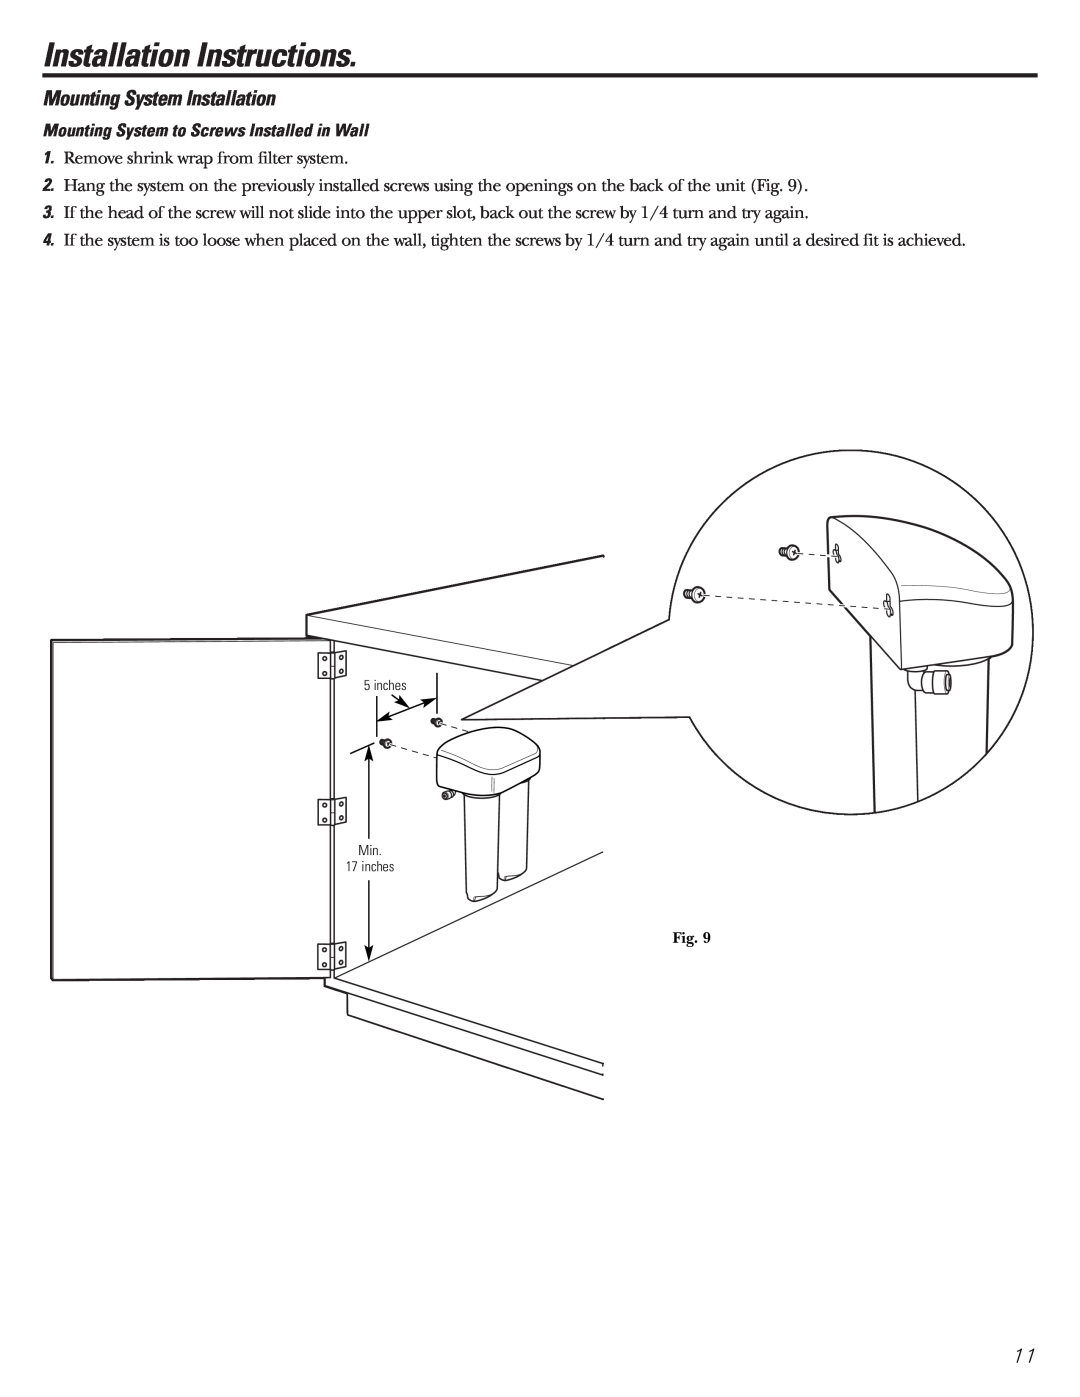 GE GNSV70FBL Installation Instructions, Mounting System Installation, Mounting System to Screws Installed in Wall 